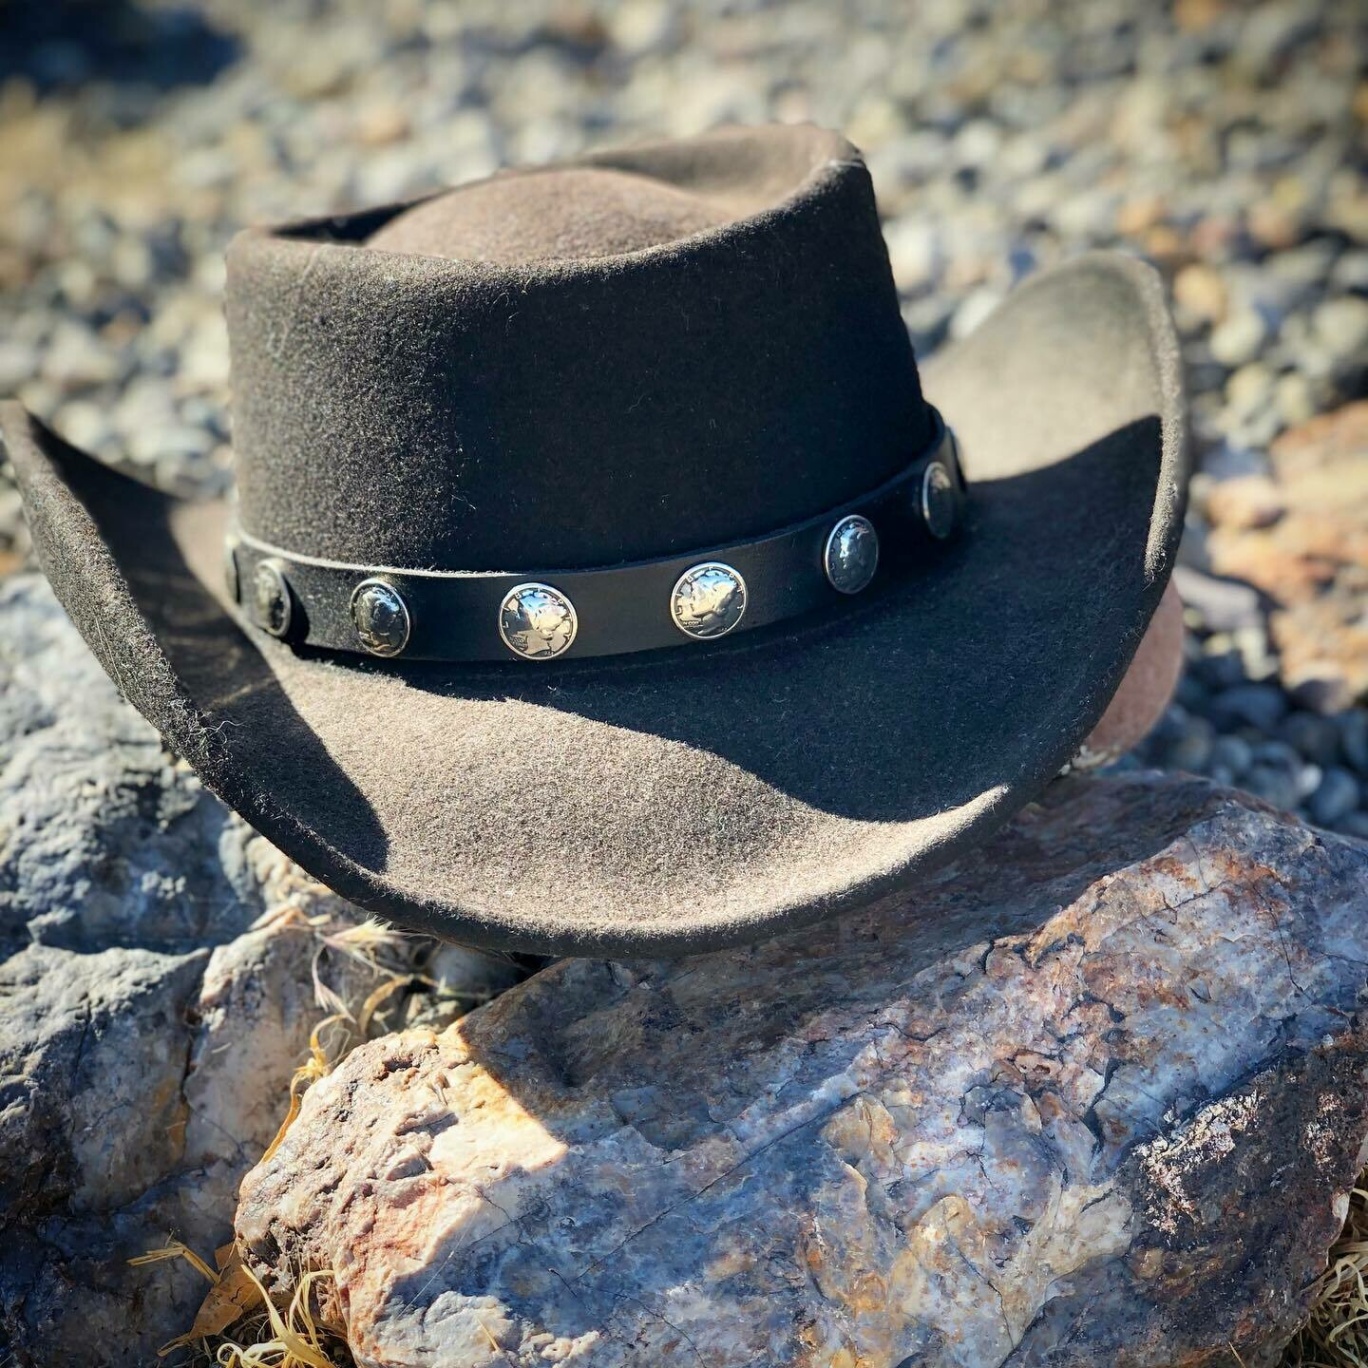 Yee-haw! Elevate Your Style With Top-Notch Cowboy Hat Accessories